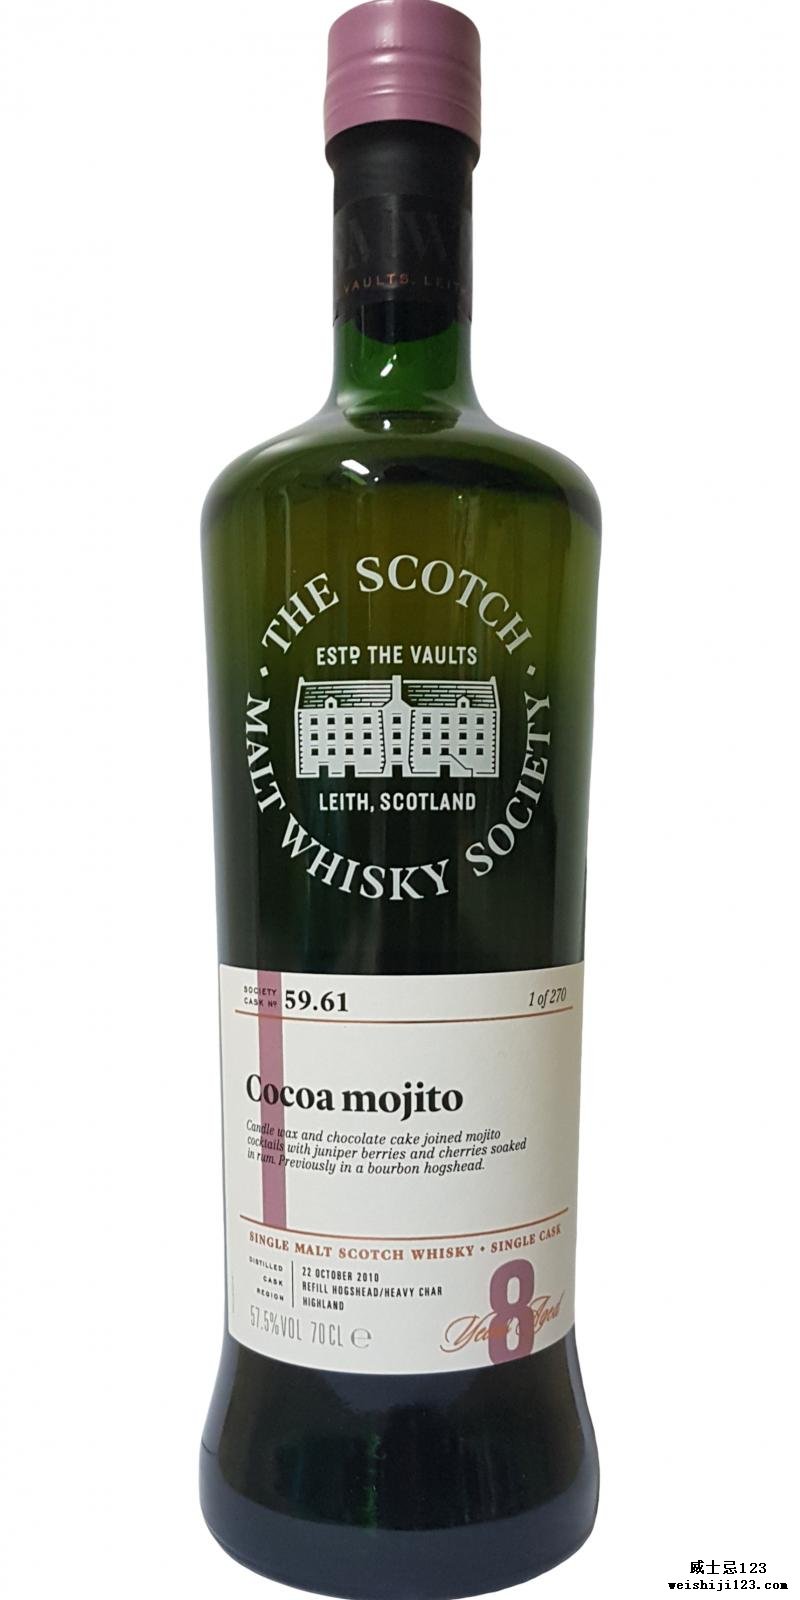 Teaninich 2010 SMWS 59.61